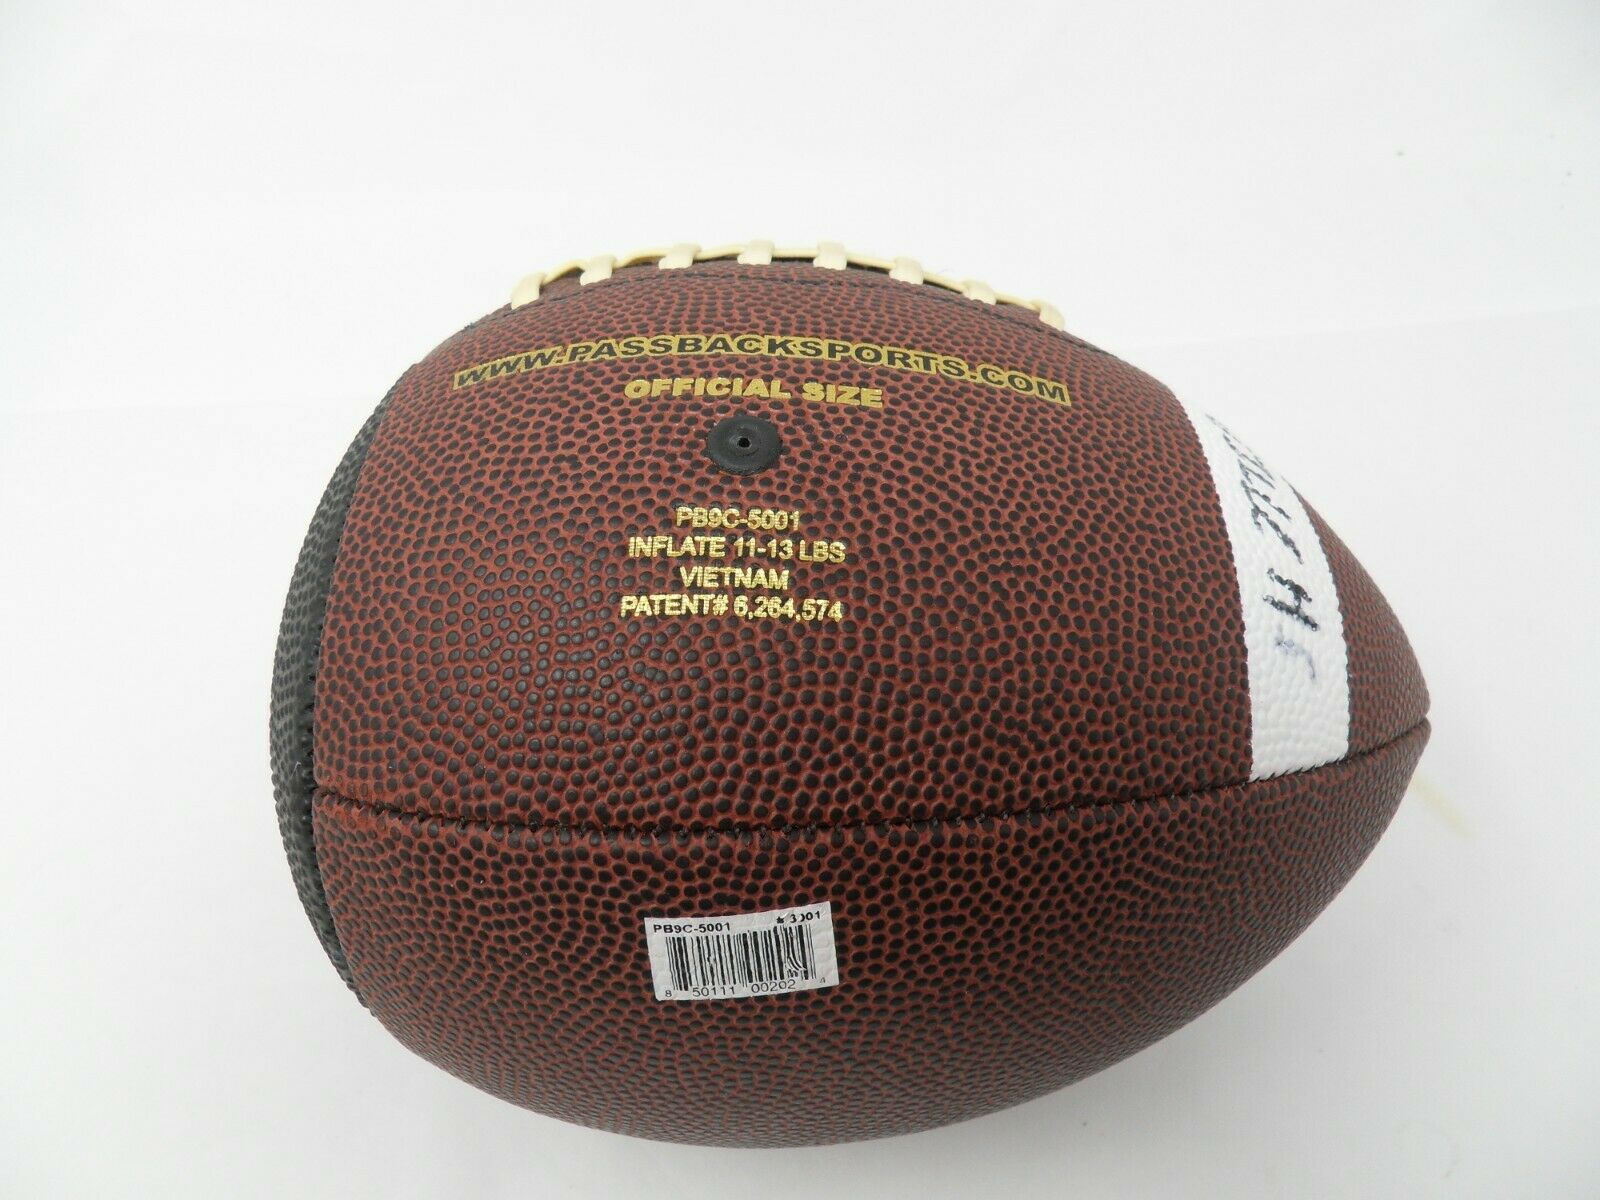   Nice Condition Training Aid PASSBACK Official Size Football Composite age 14